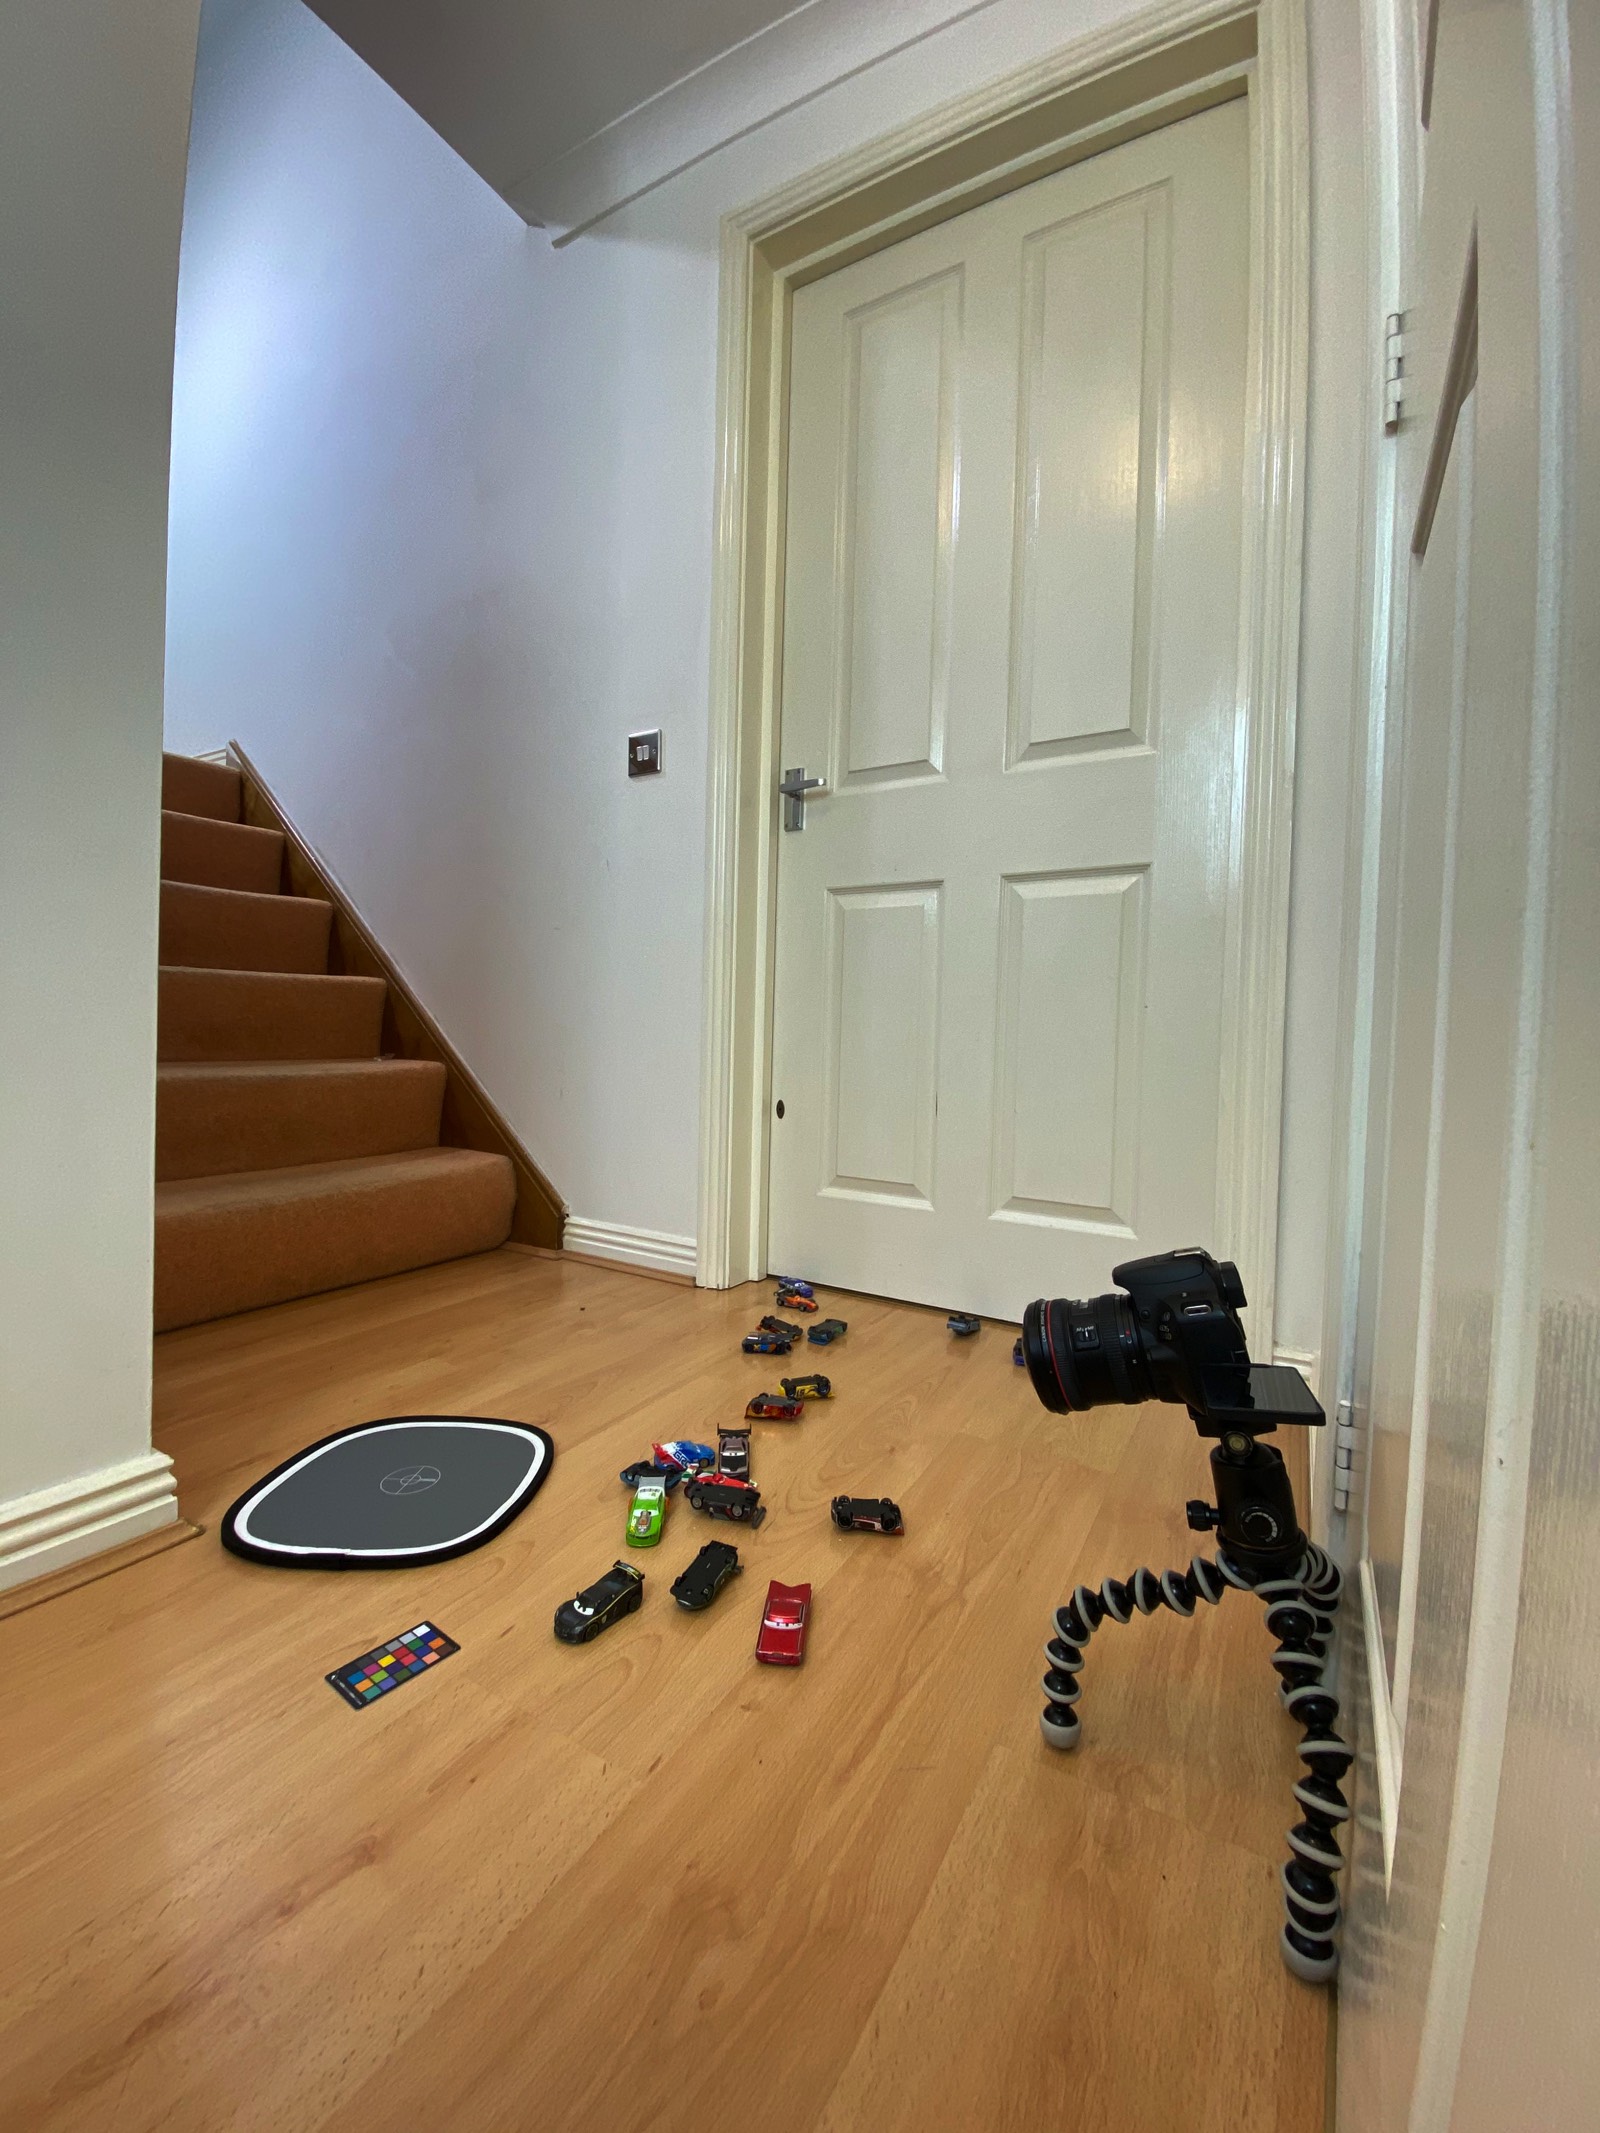 Home Alone Toy Cars Stairs